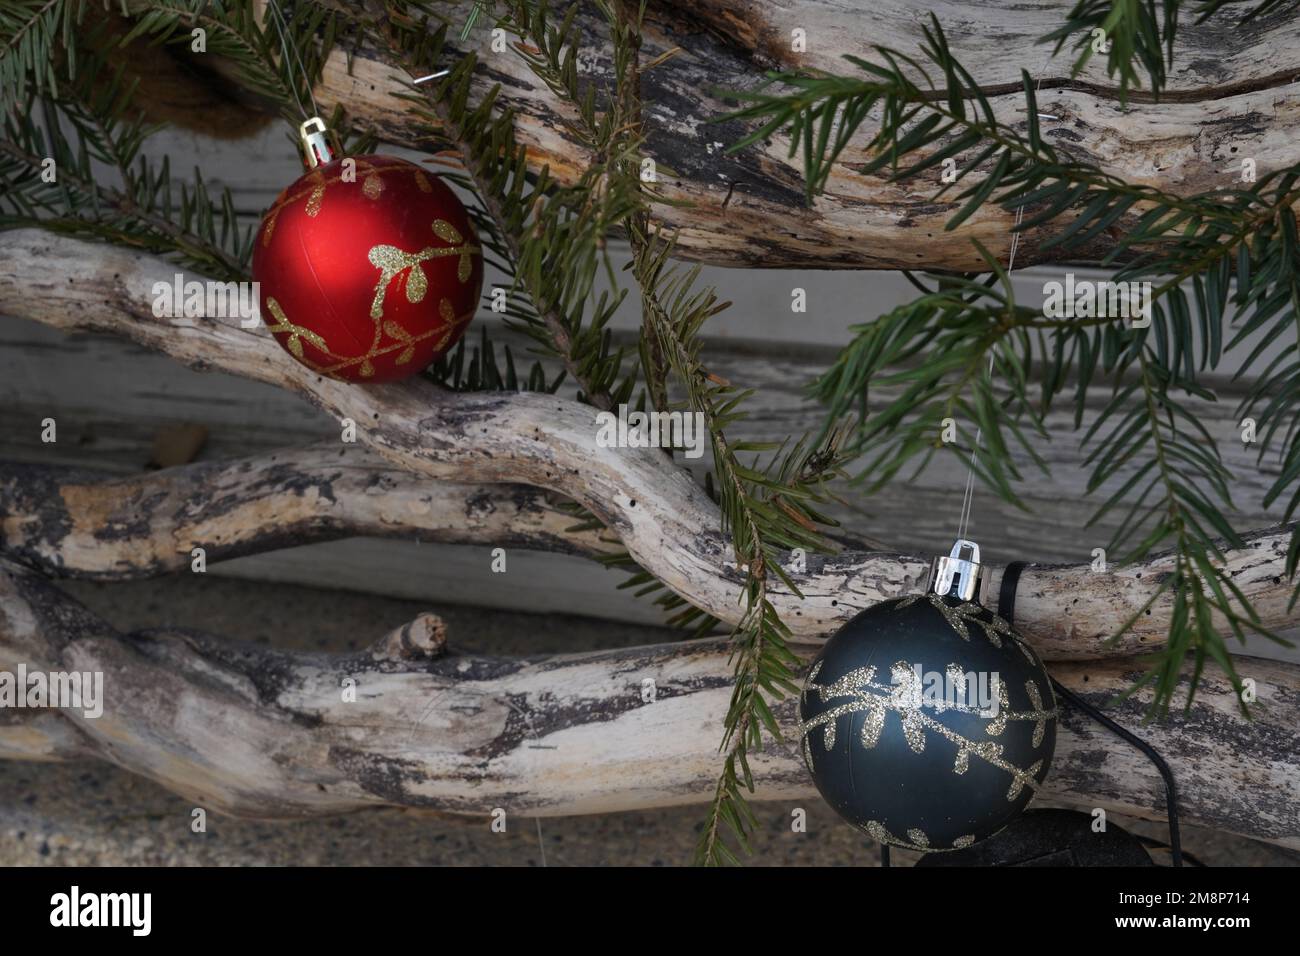 Red and blue colour Christmas balls with gold ornaments decorations are arranged on coniferous twigs as outdoor seasonal decoration. Stock Photo